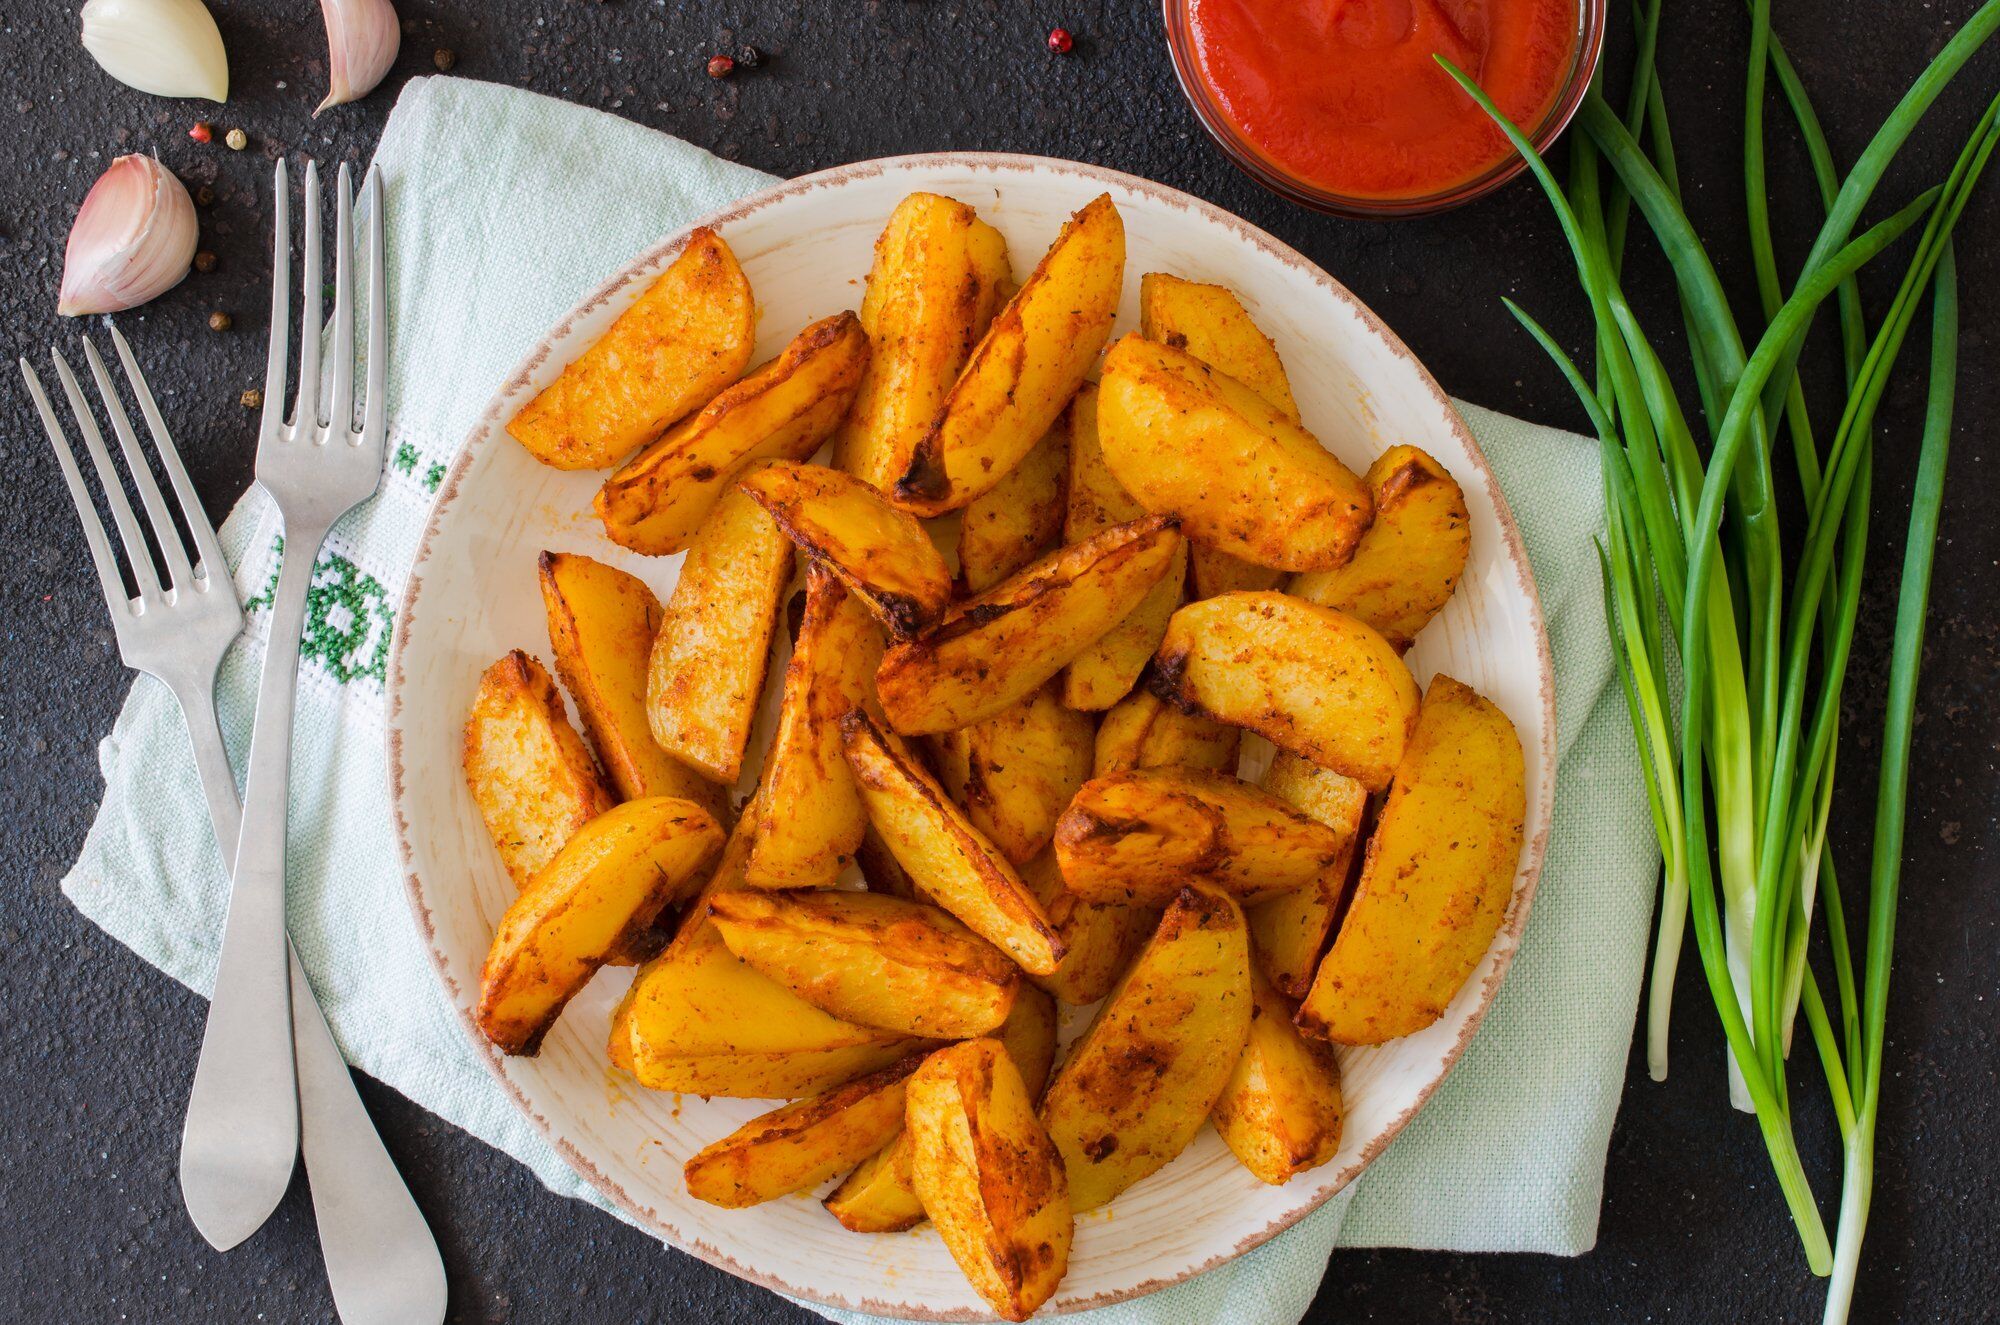 Fried potatoes with spices